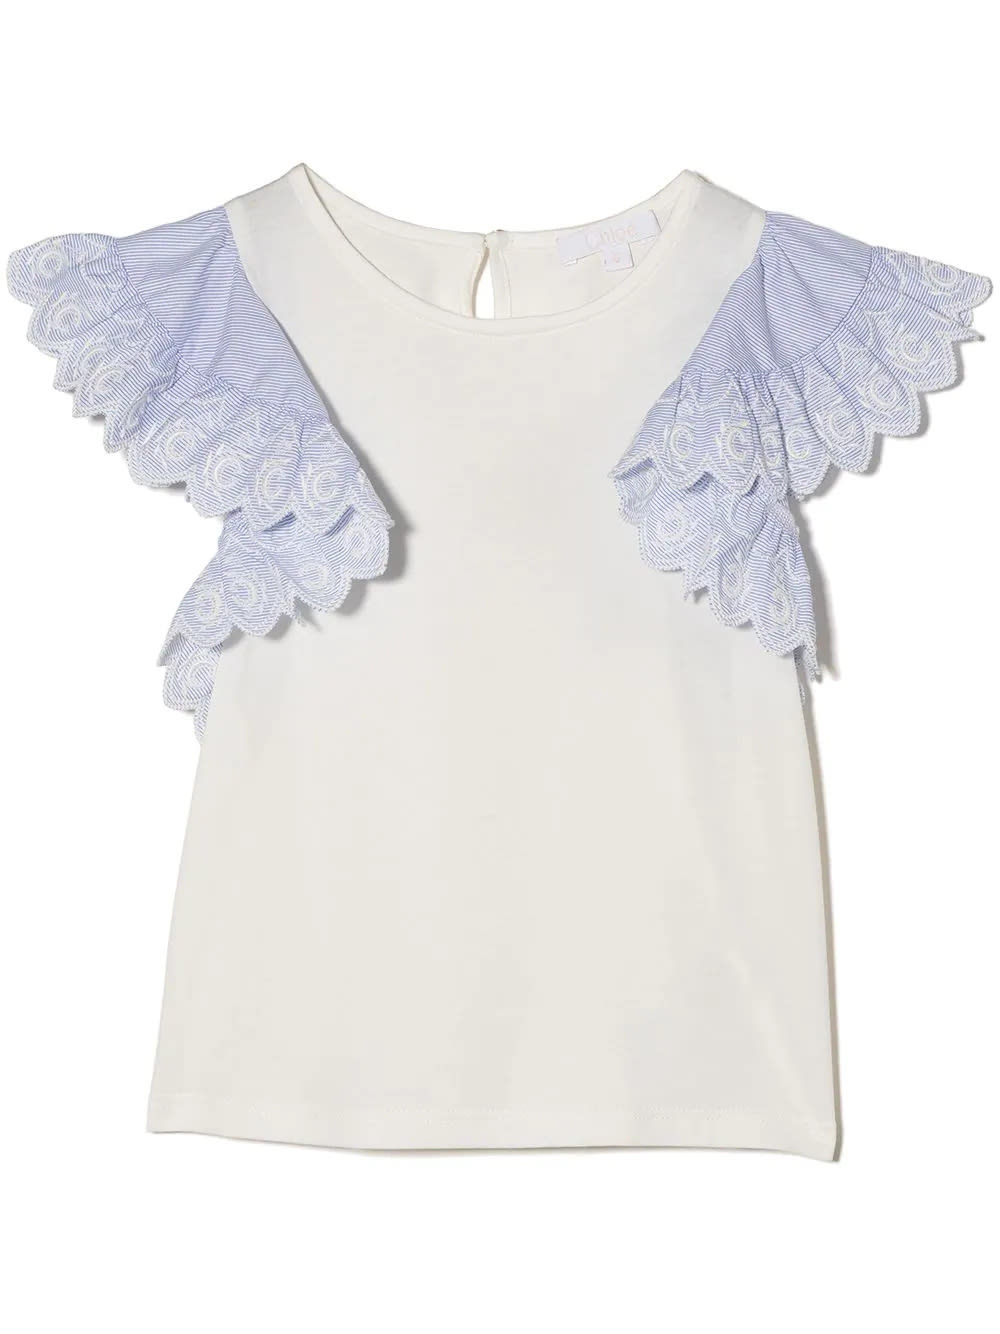 Chloé Kids White Top With Striped Ruffles On The Sleeves With Embroidered c